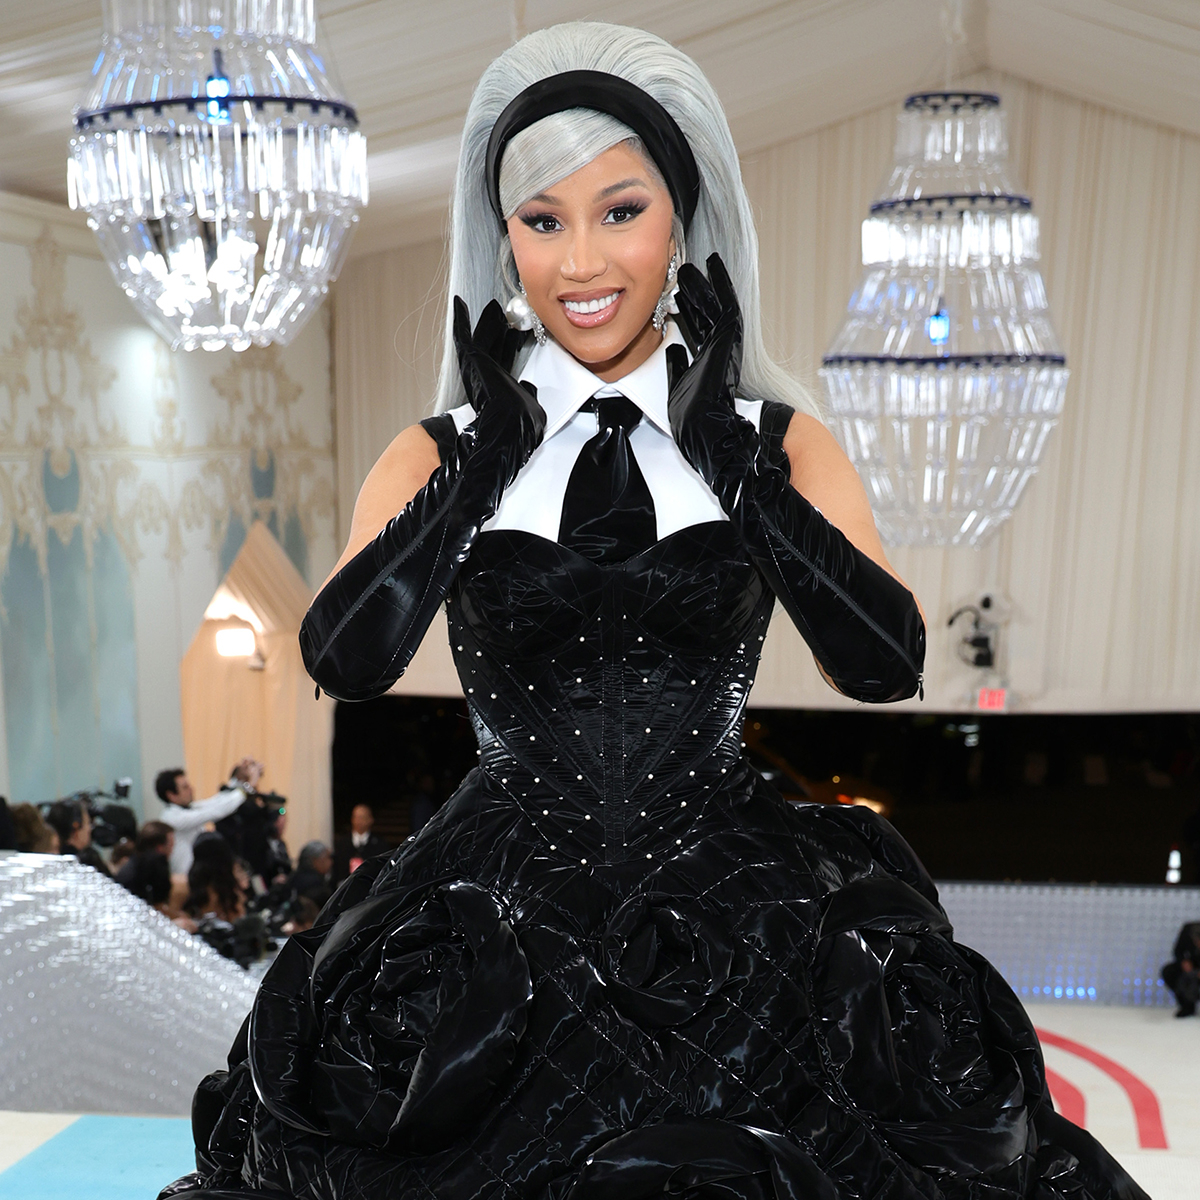 Met Gala News, Pictures, and Videos - E! Online